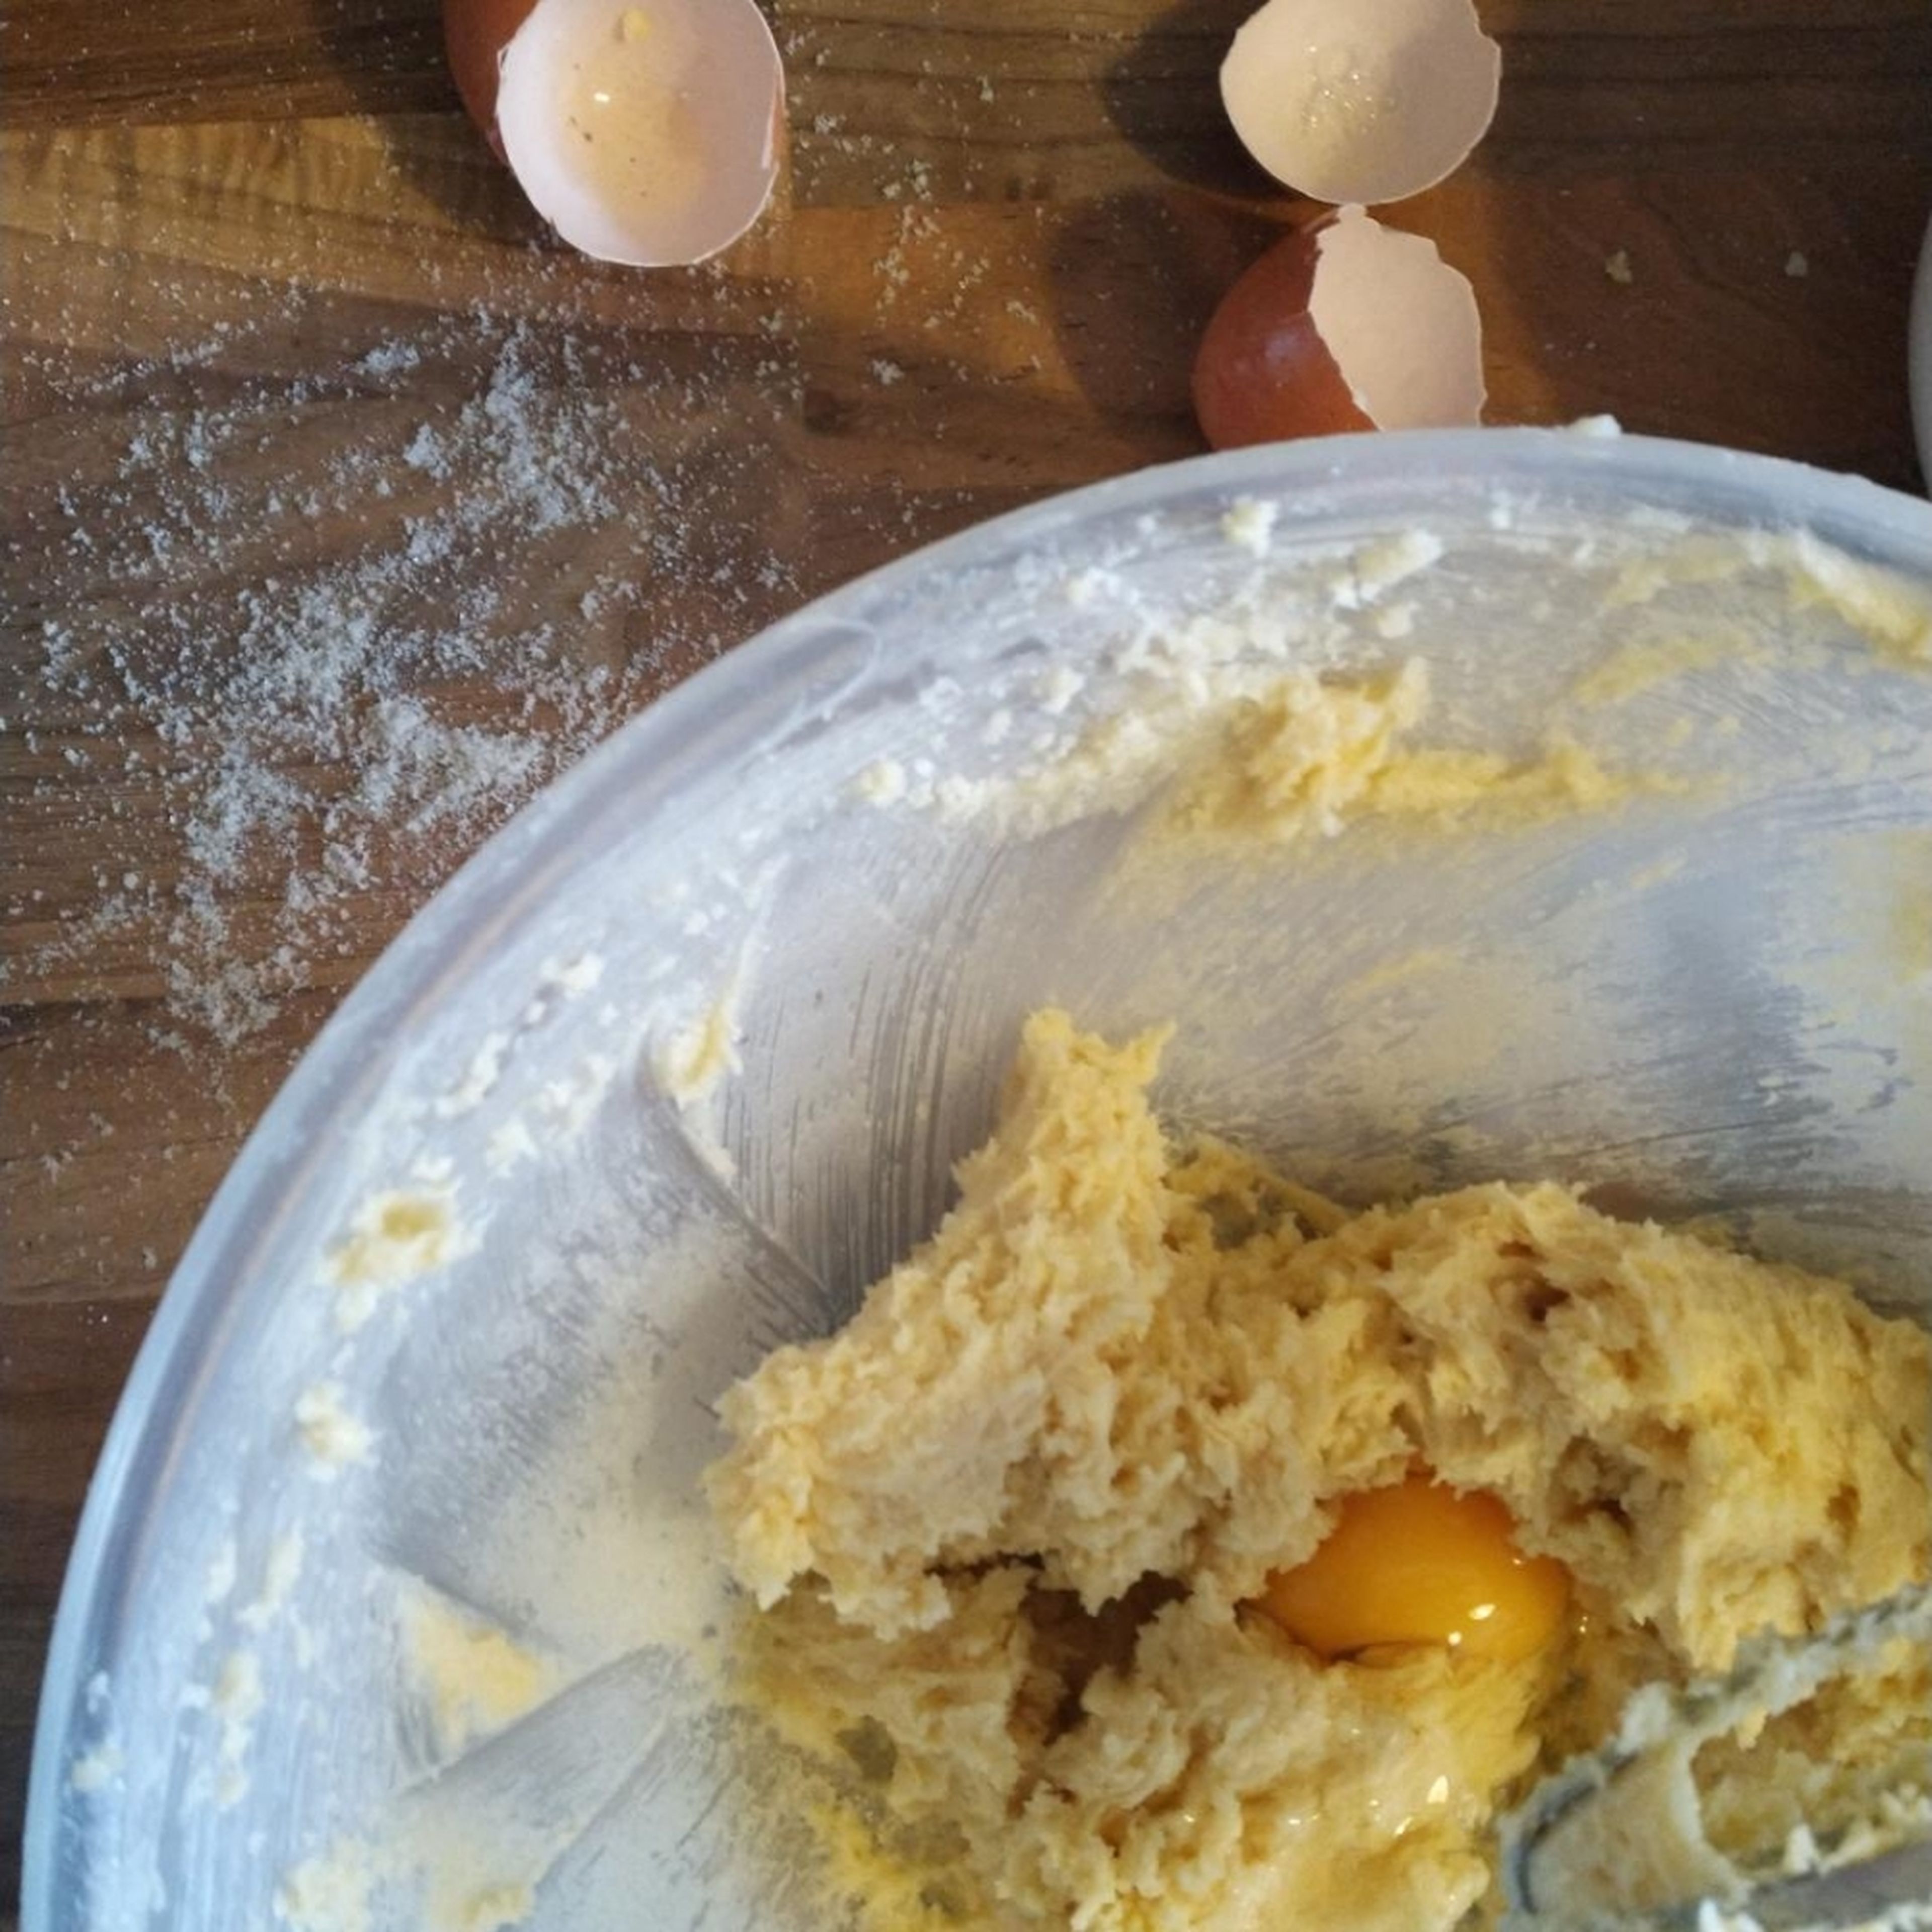 Separate 3 of the eggs, and add the yolks one by one into the mixture, adding the next one after the first has been incorporated. Then, add one of the whole eggs, mix for 2 minutes (electric mixer) add the next, and mix for another two minutes (electric mixer).